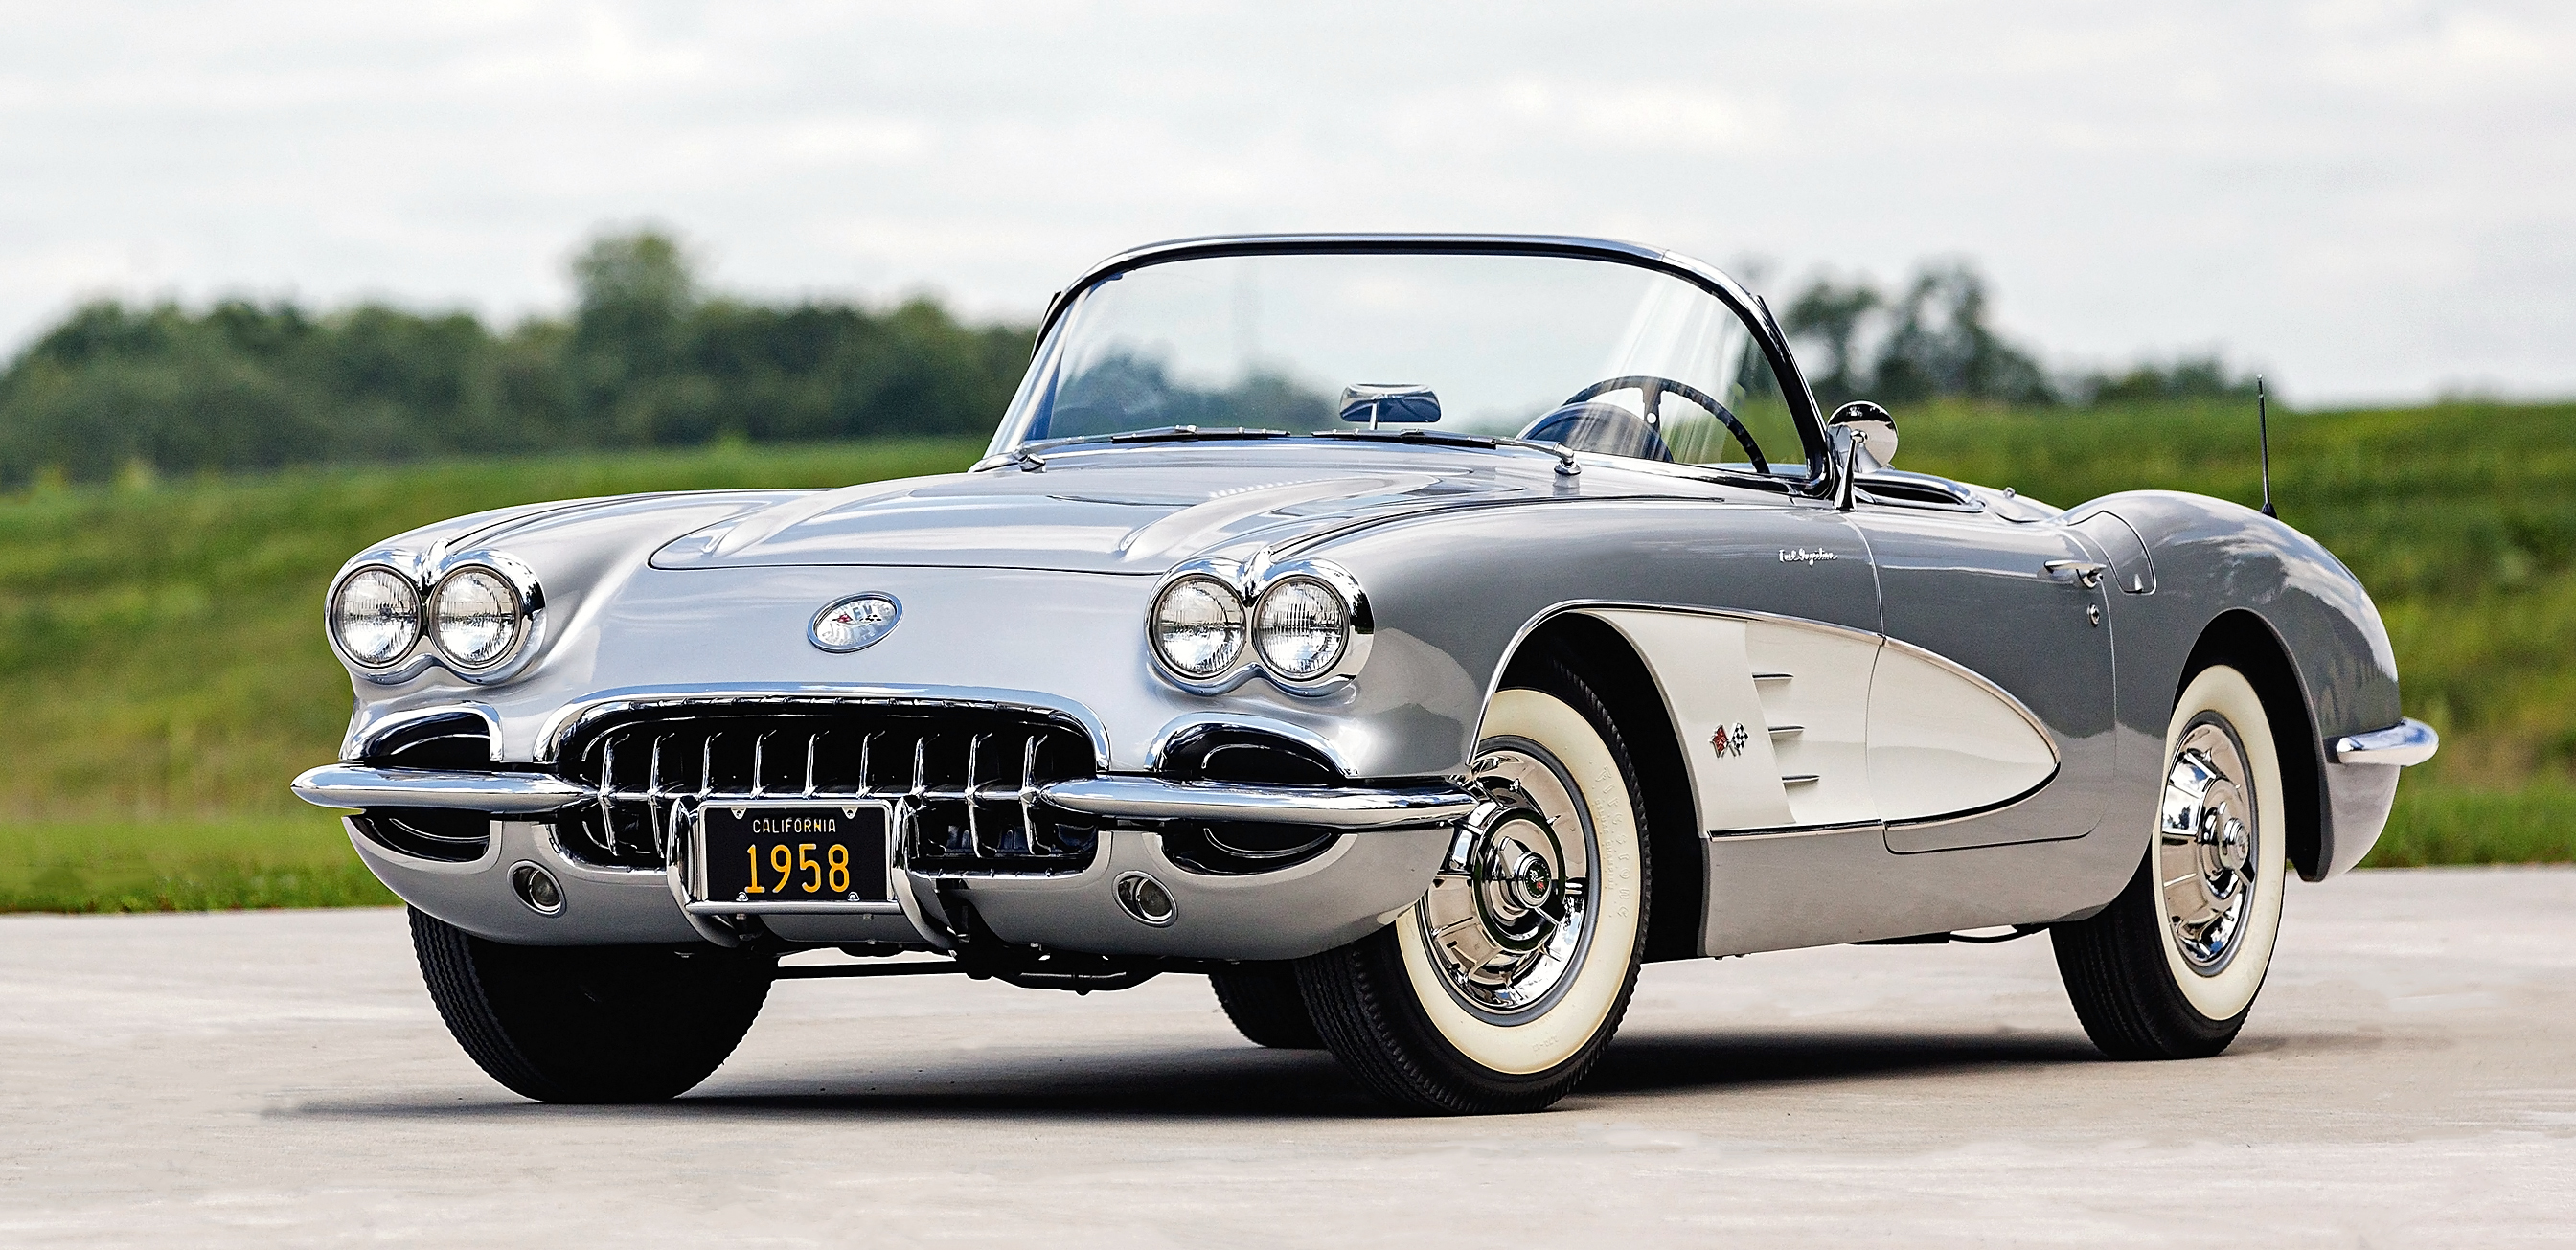 1958 Chevrolet Corvette Base | Hagerty Valuation Tools